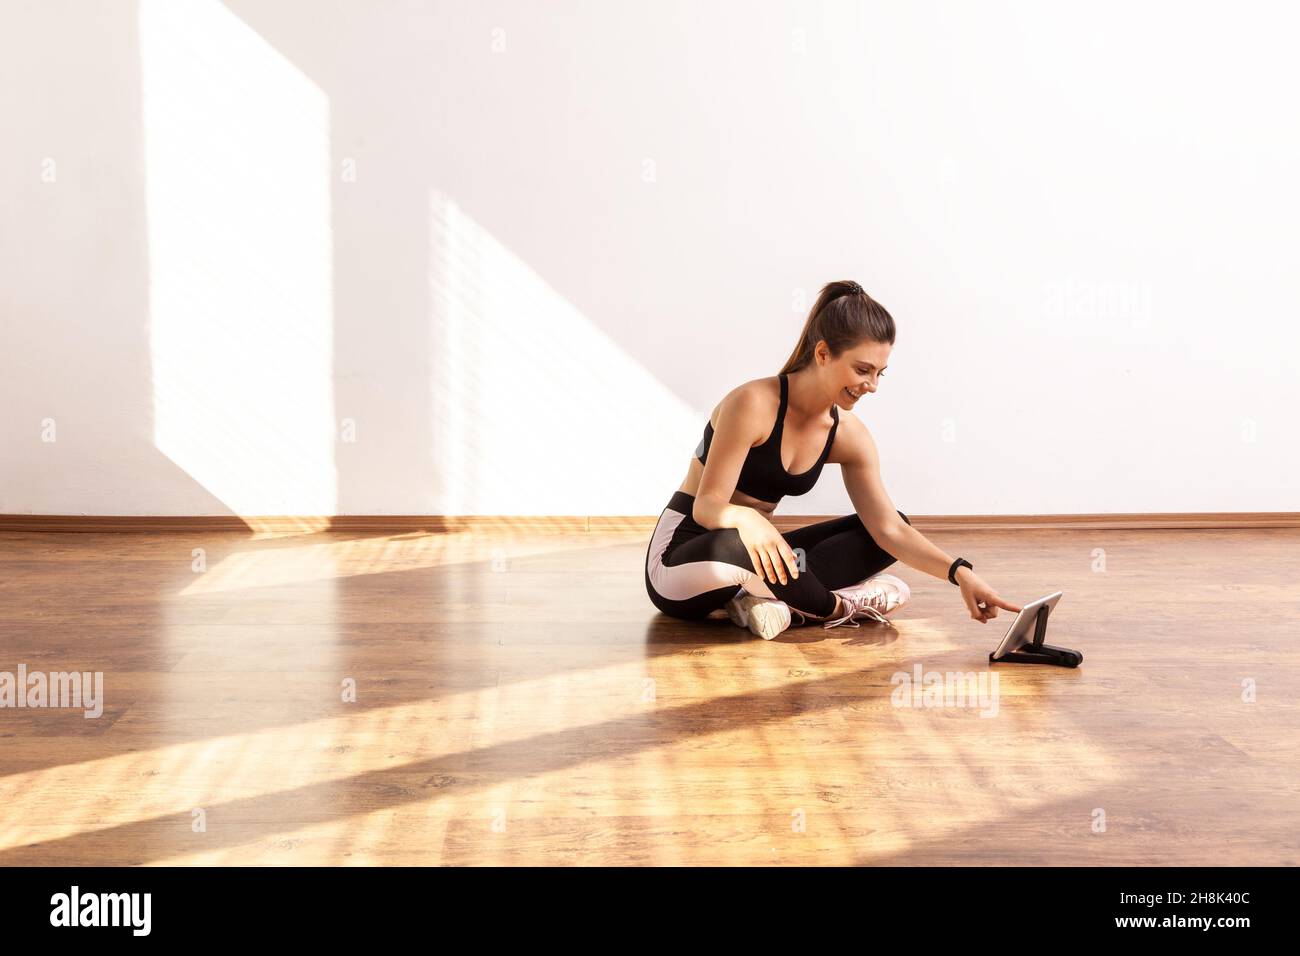 Woman searching online fitness course for beginners in Internet, training video on tablet, wearing black sports top and tights. Full length studio shot illuminated by sunlight from window. Stock Photo